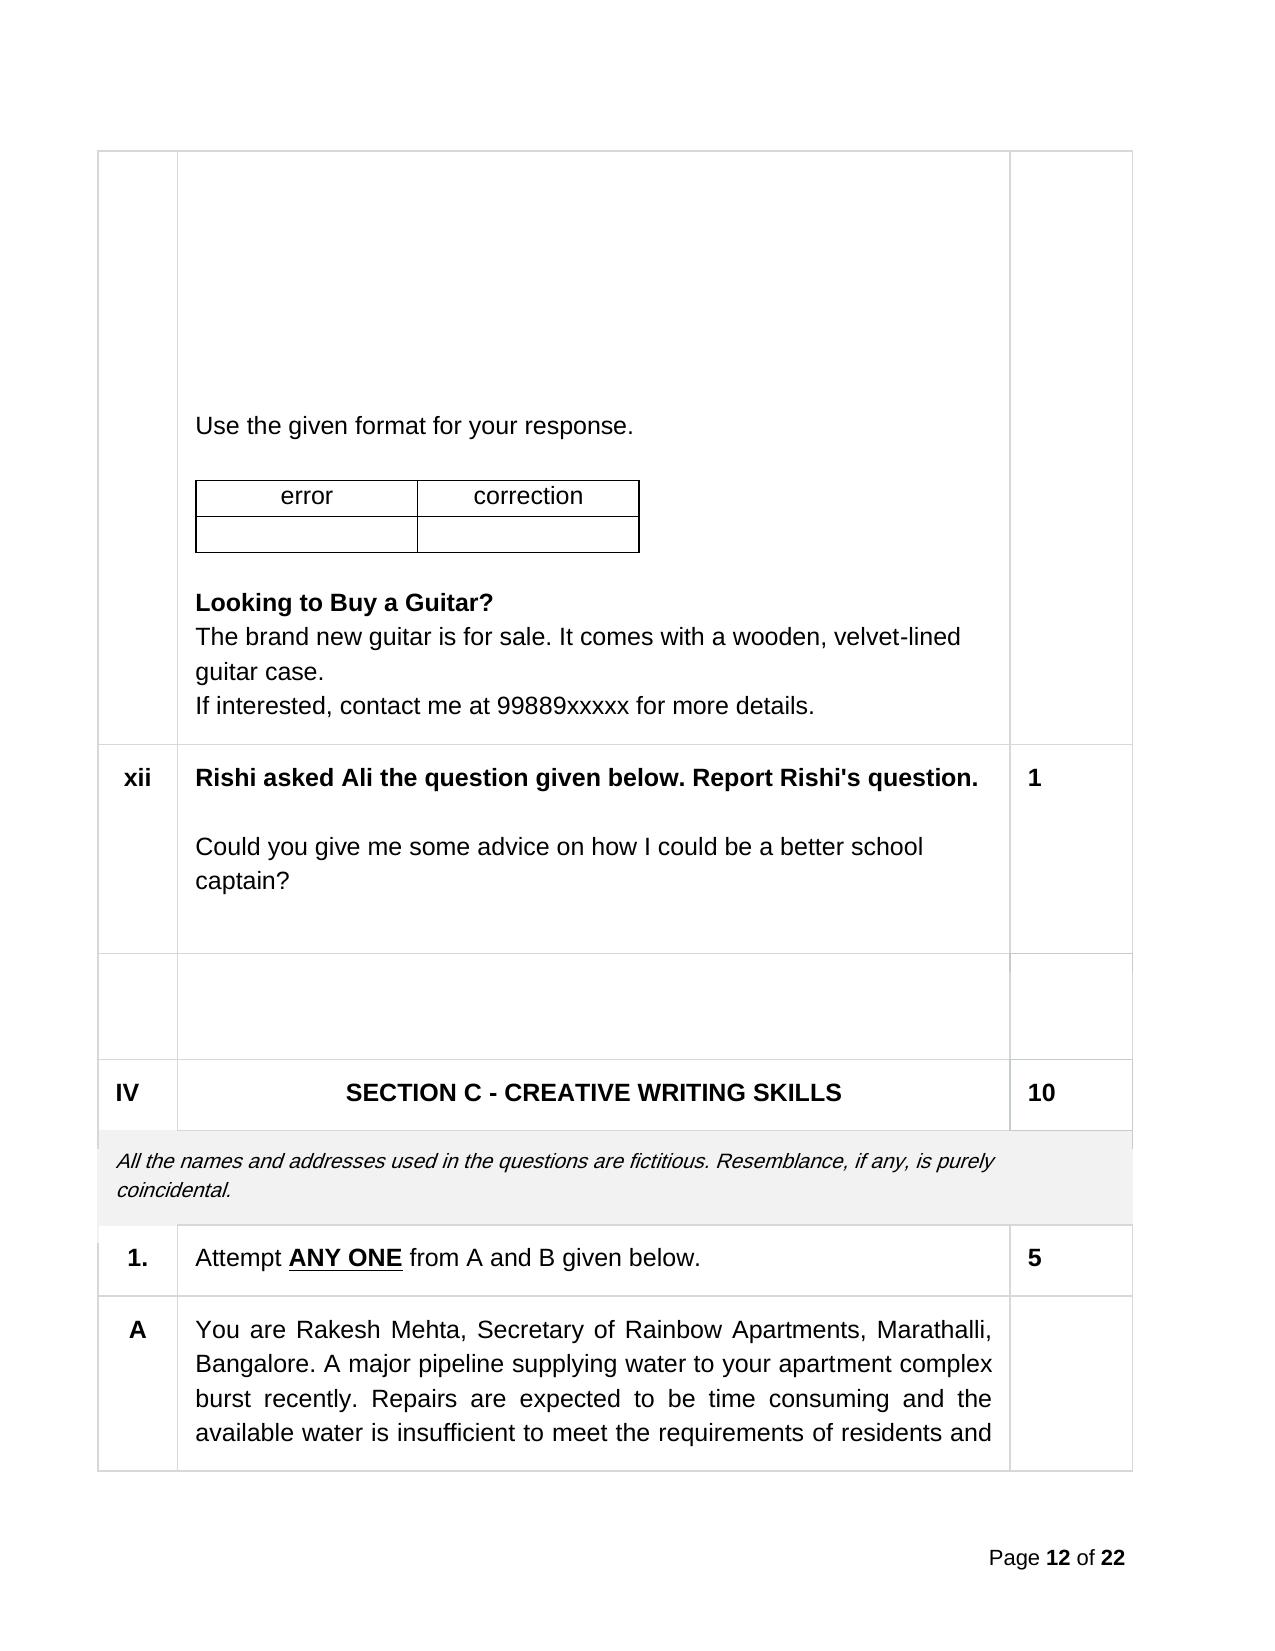 CBSE Class 10 English Practice Questions 2022-23 - Page 12